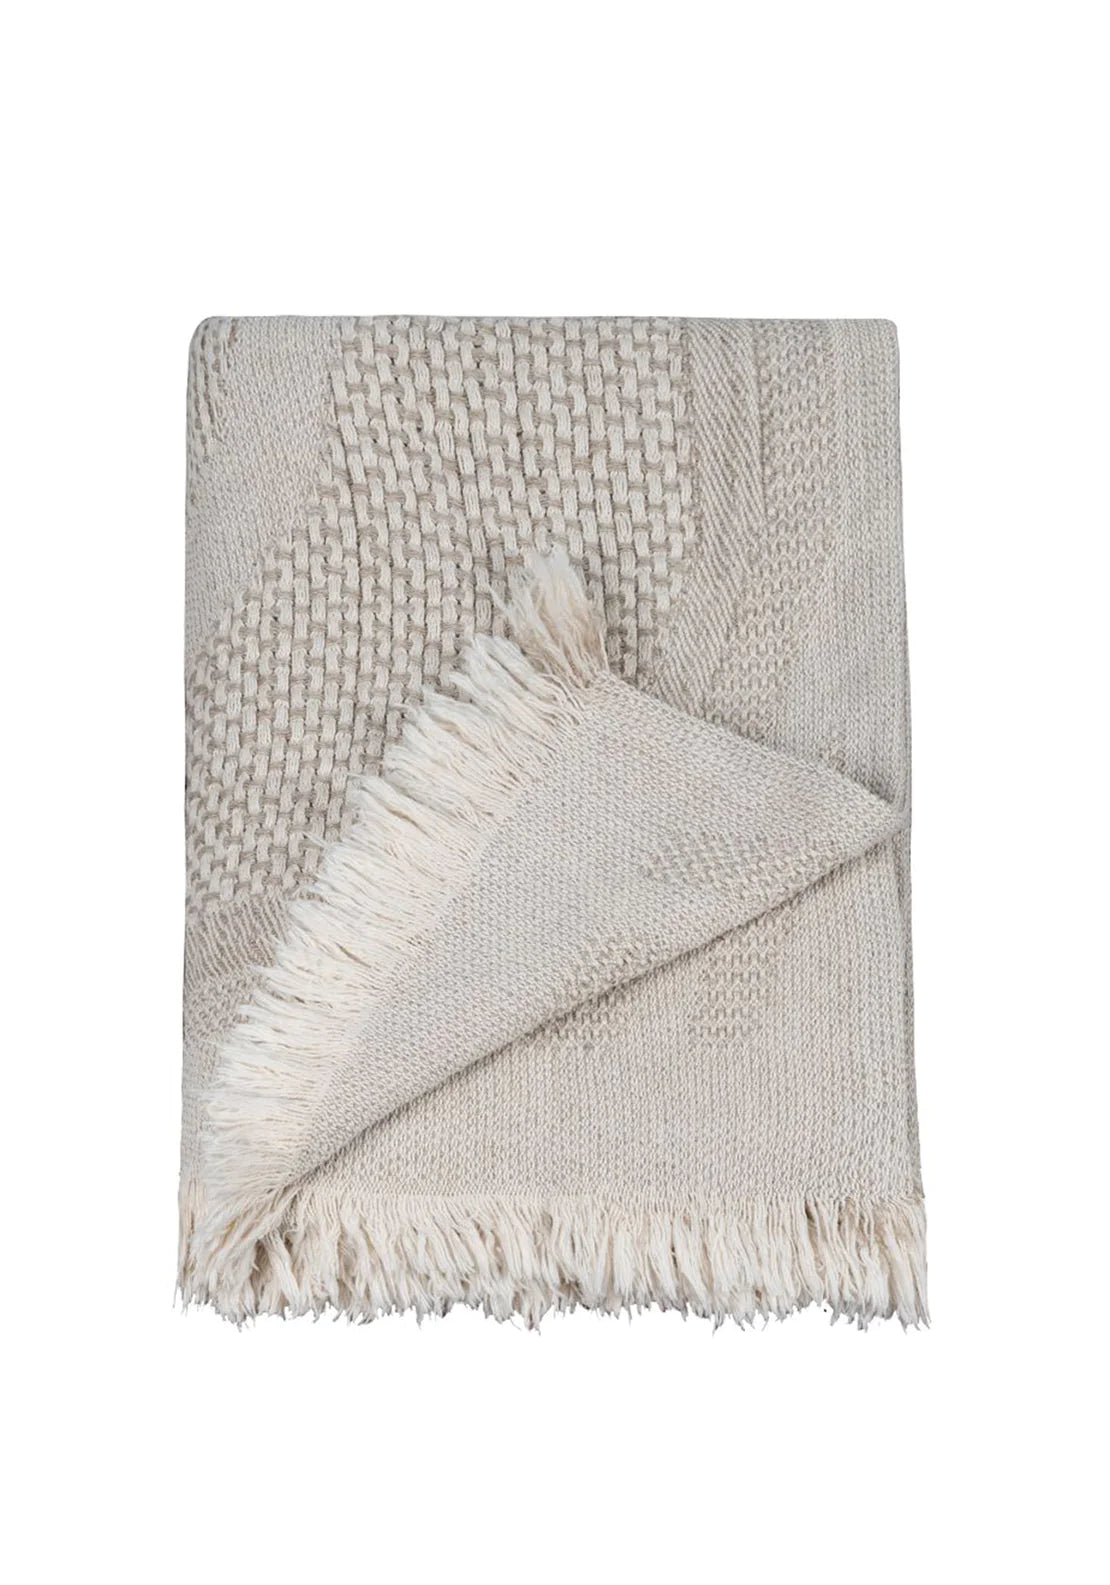 SCATTERBOX THROW AMIRA 120X170CM NATURAL